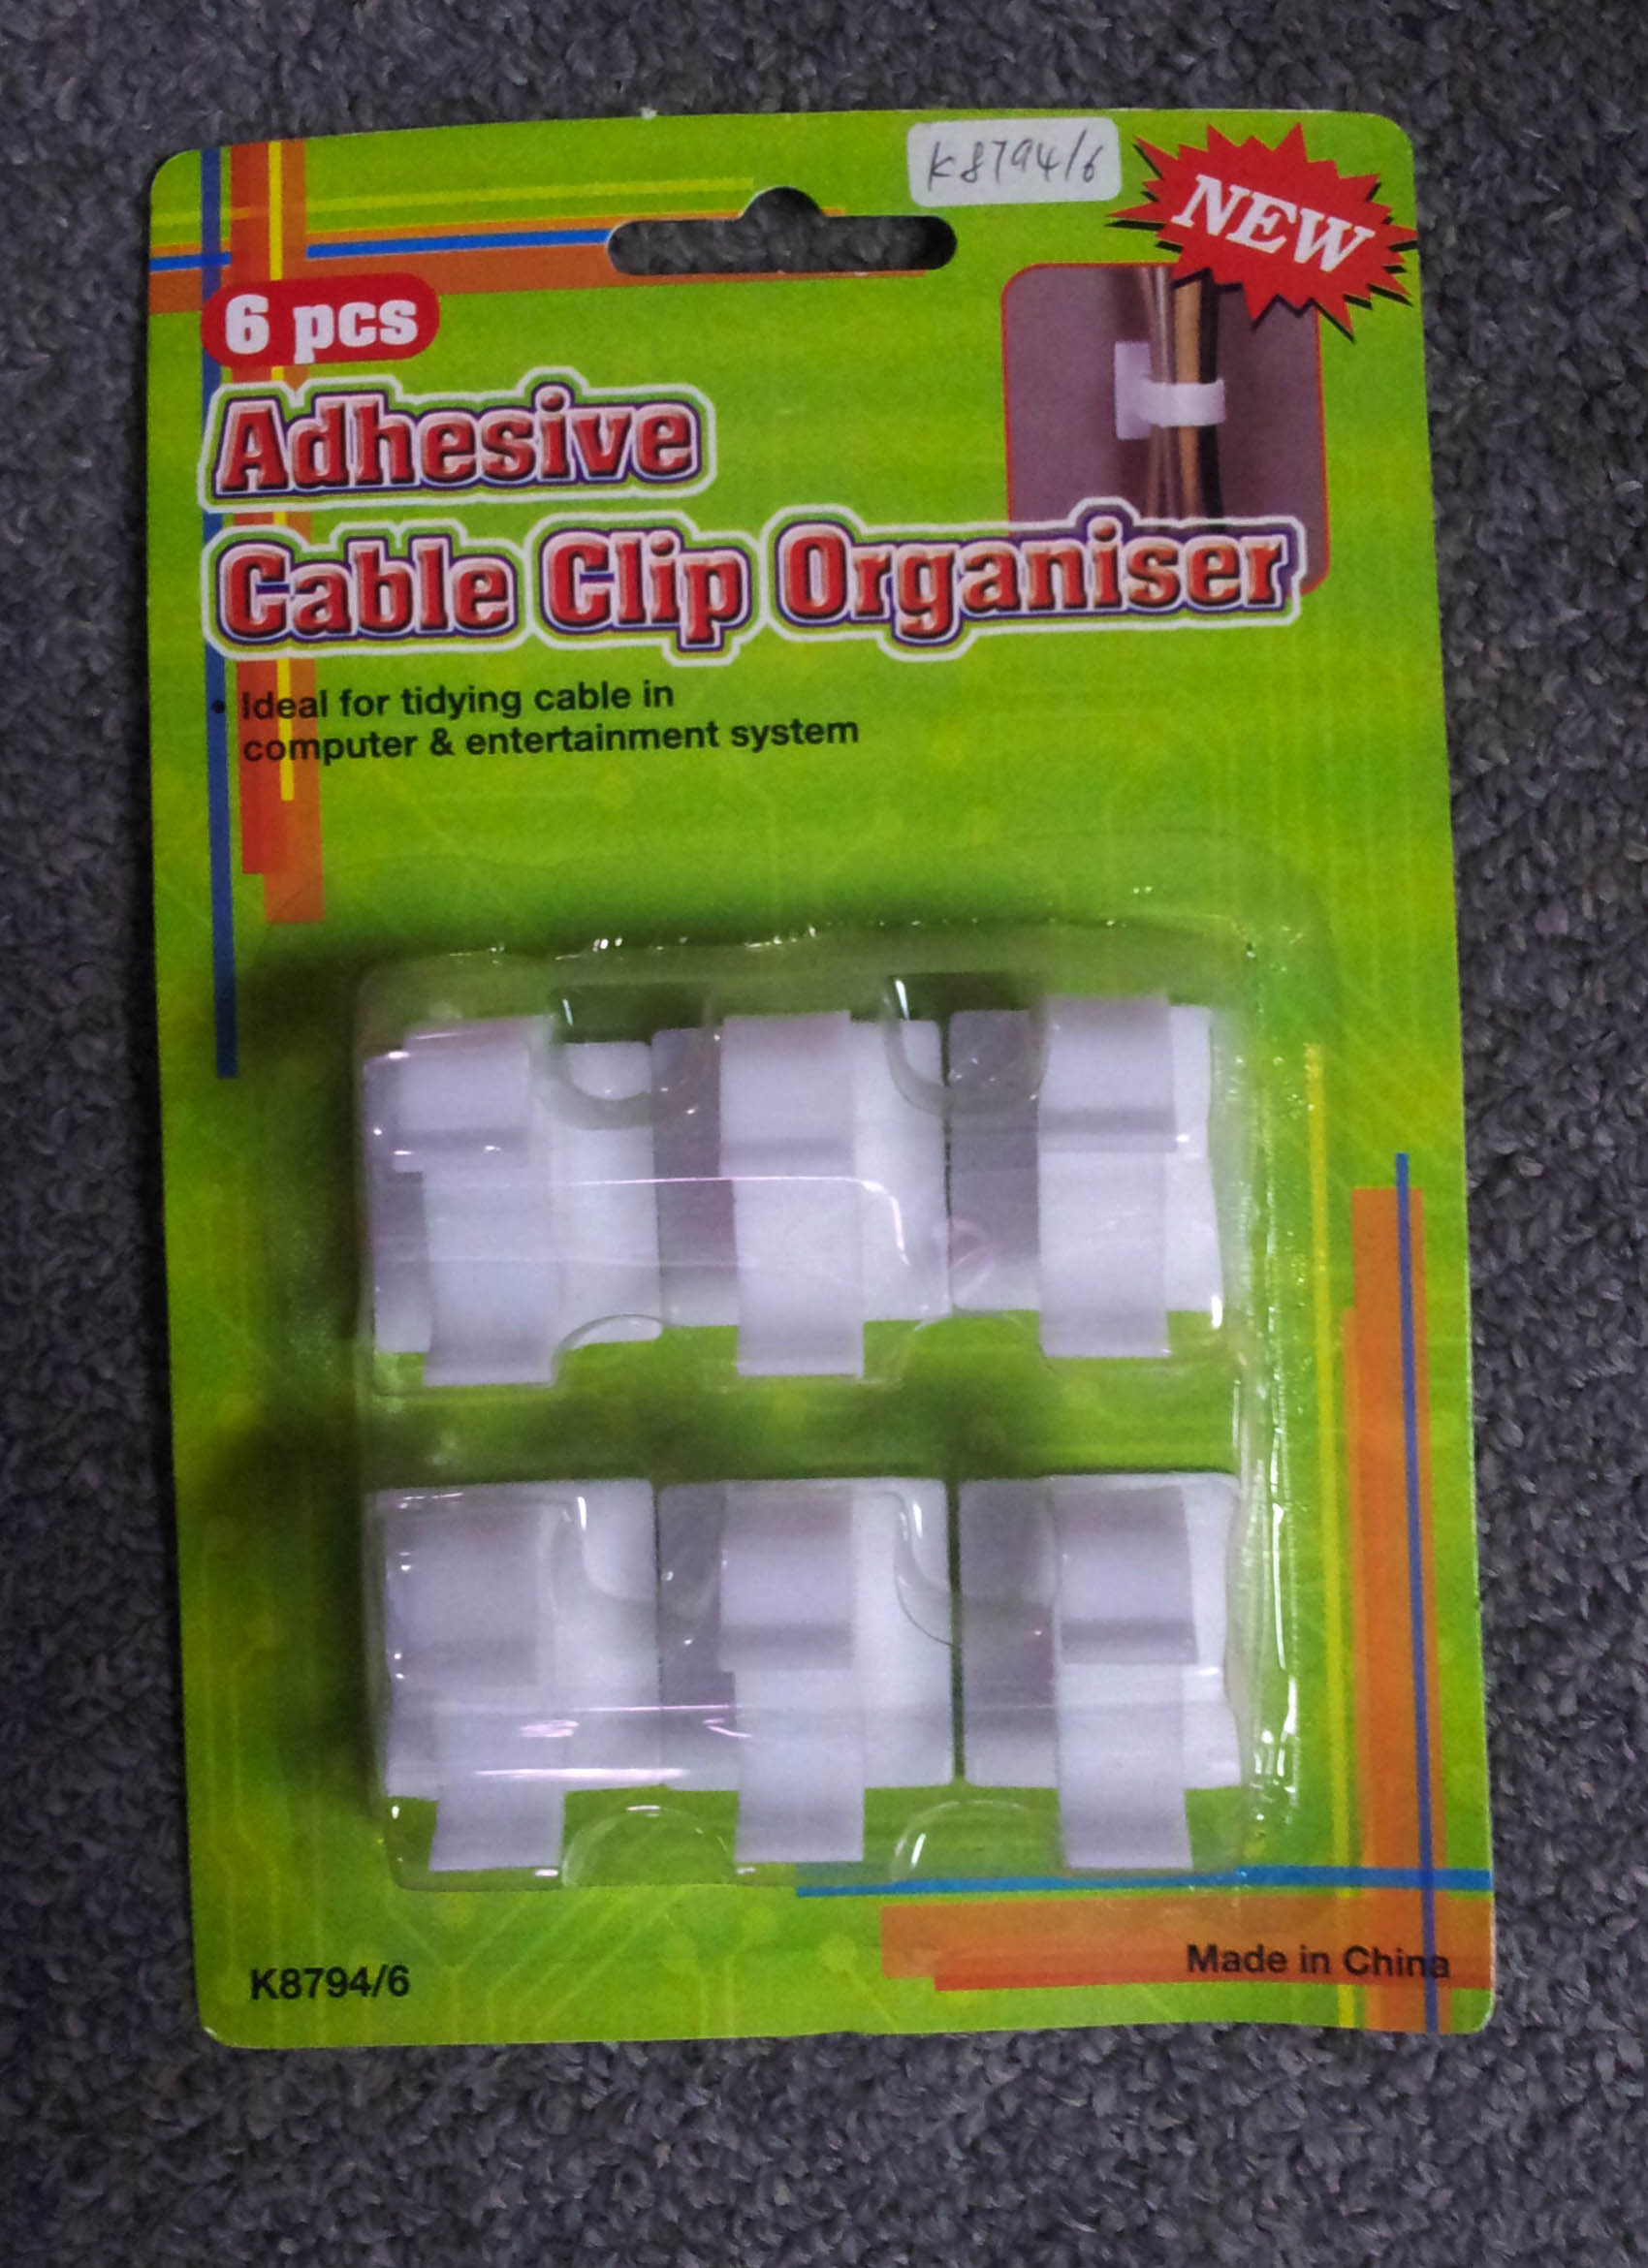 K8794/6 ADHESIVE CABLE CLIP ORGANISER